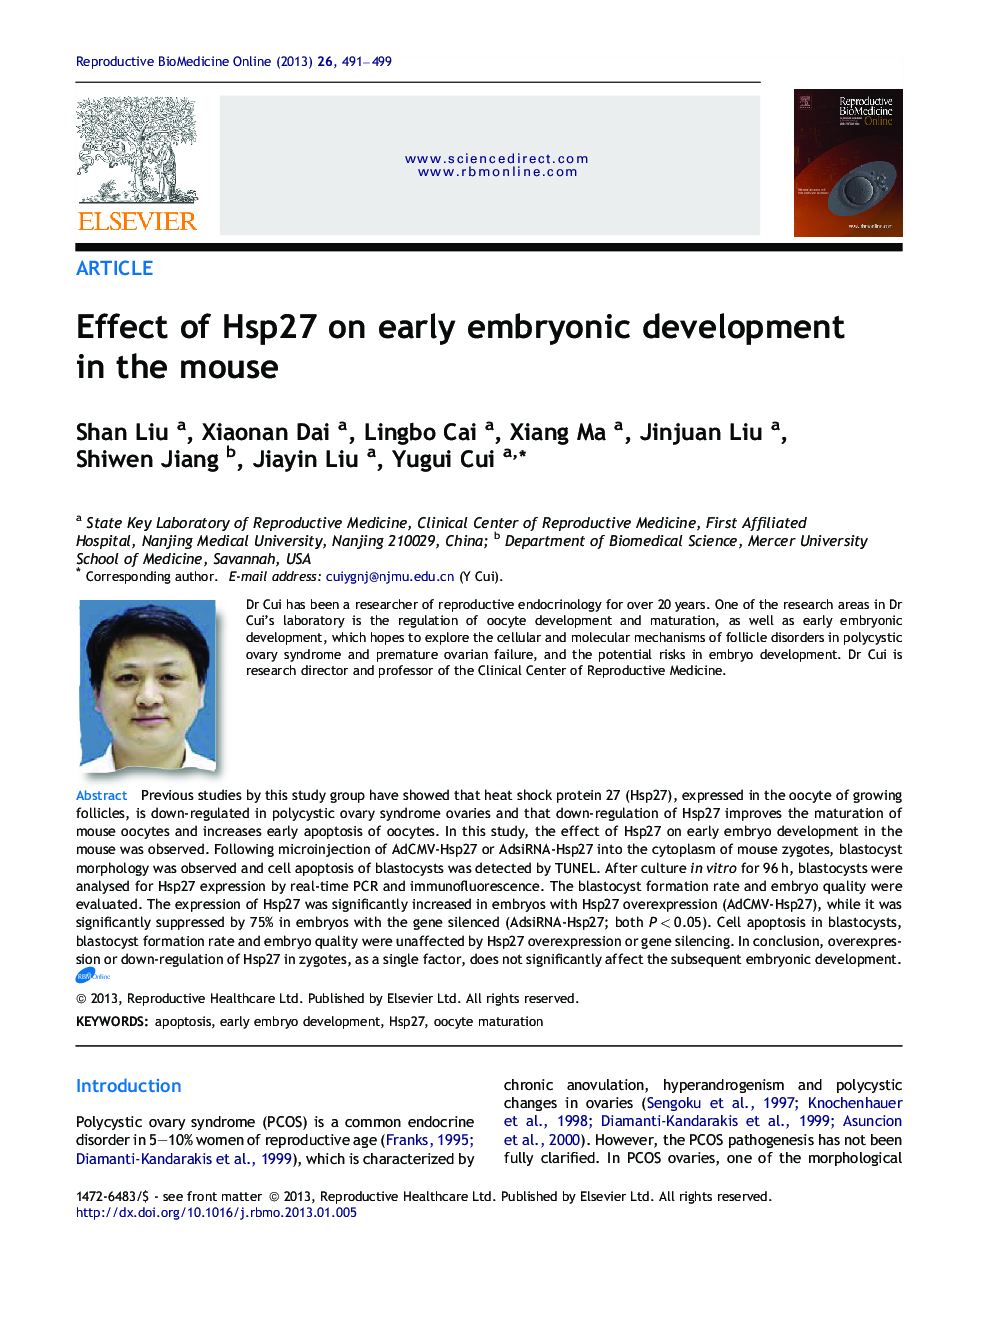 Effect of Hsp27 on early embryonic development in the mouse